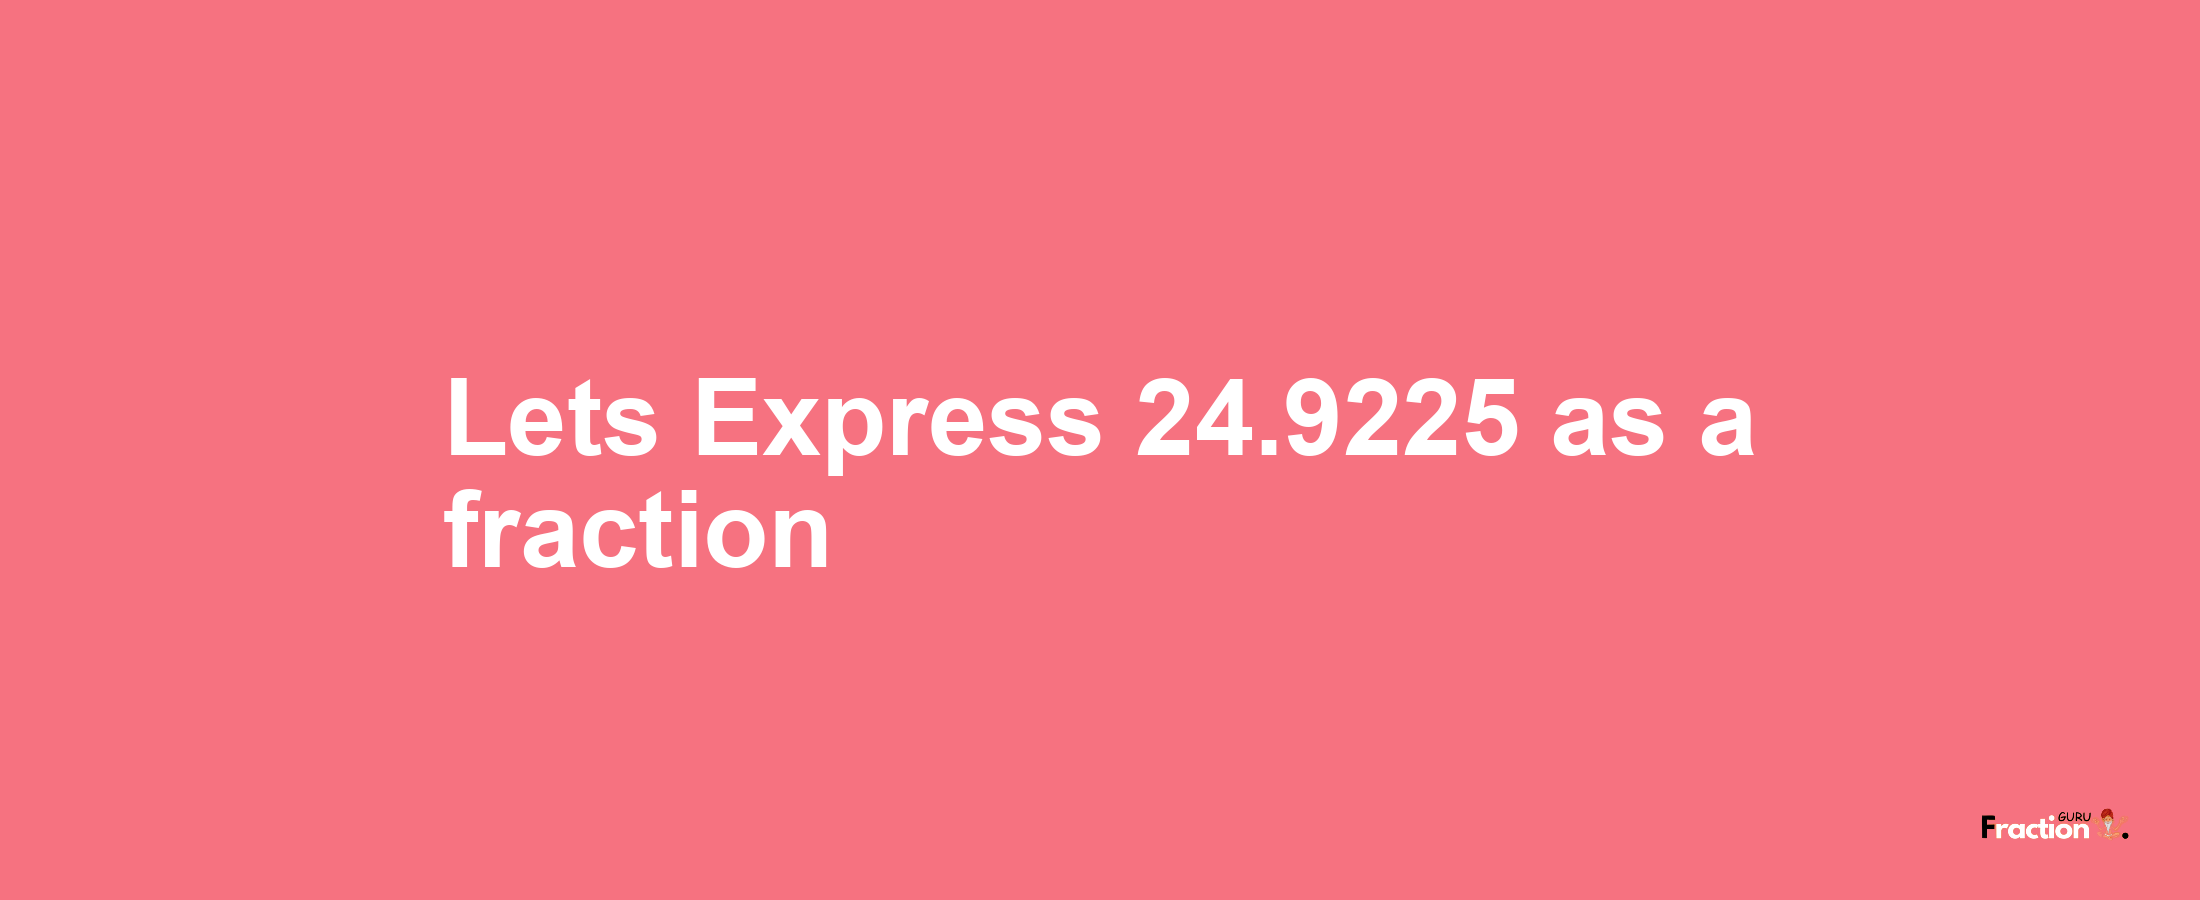 Lets Express 24.9225 as afraction